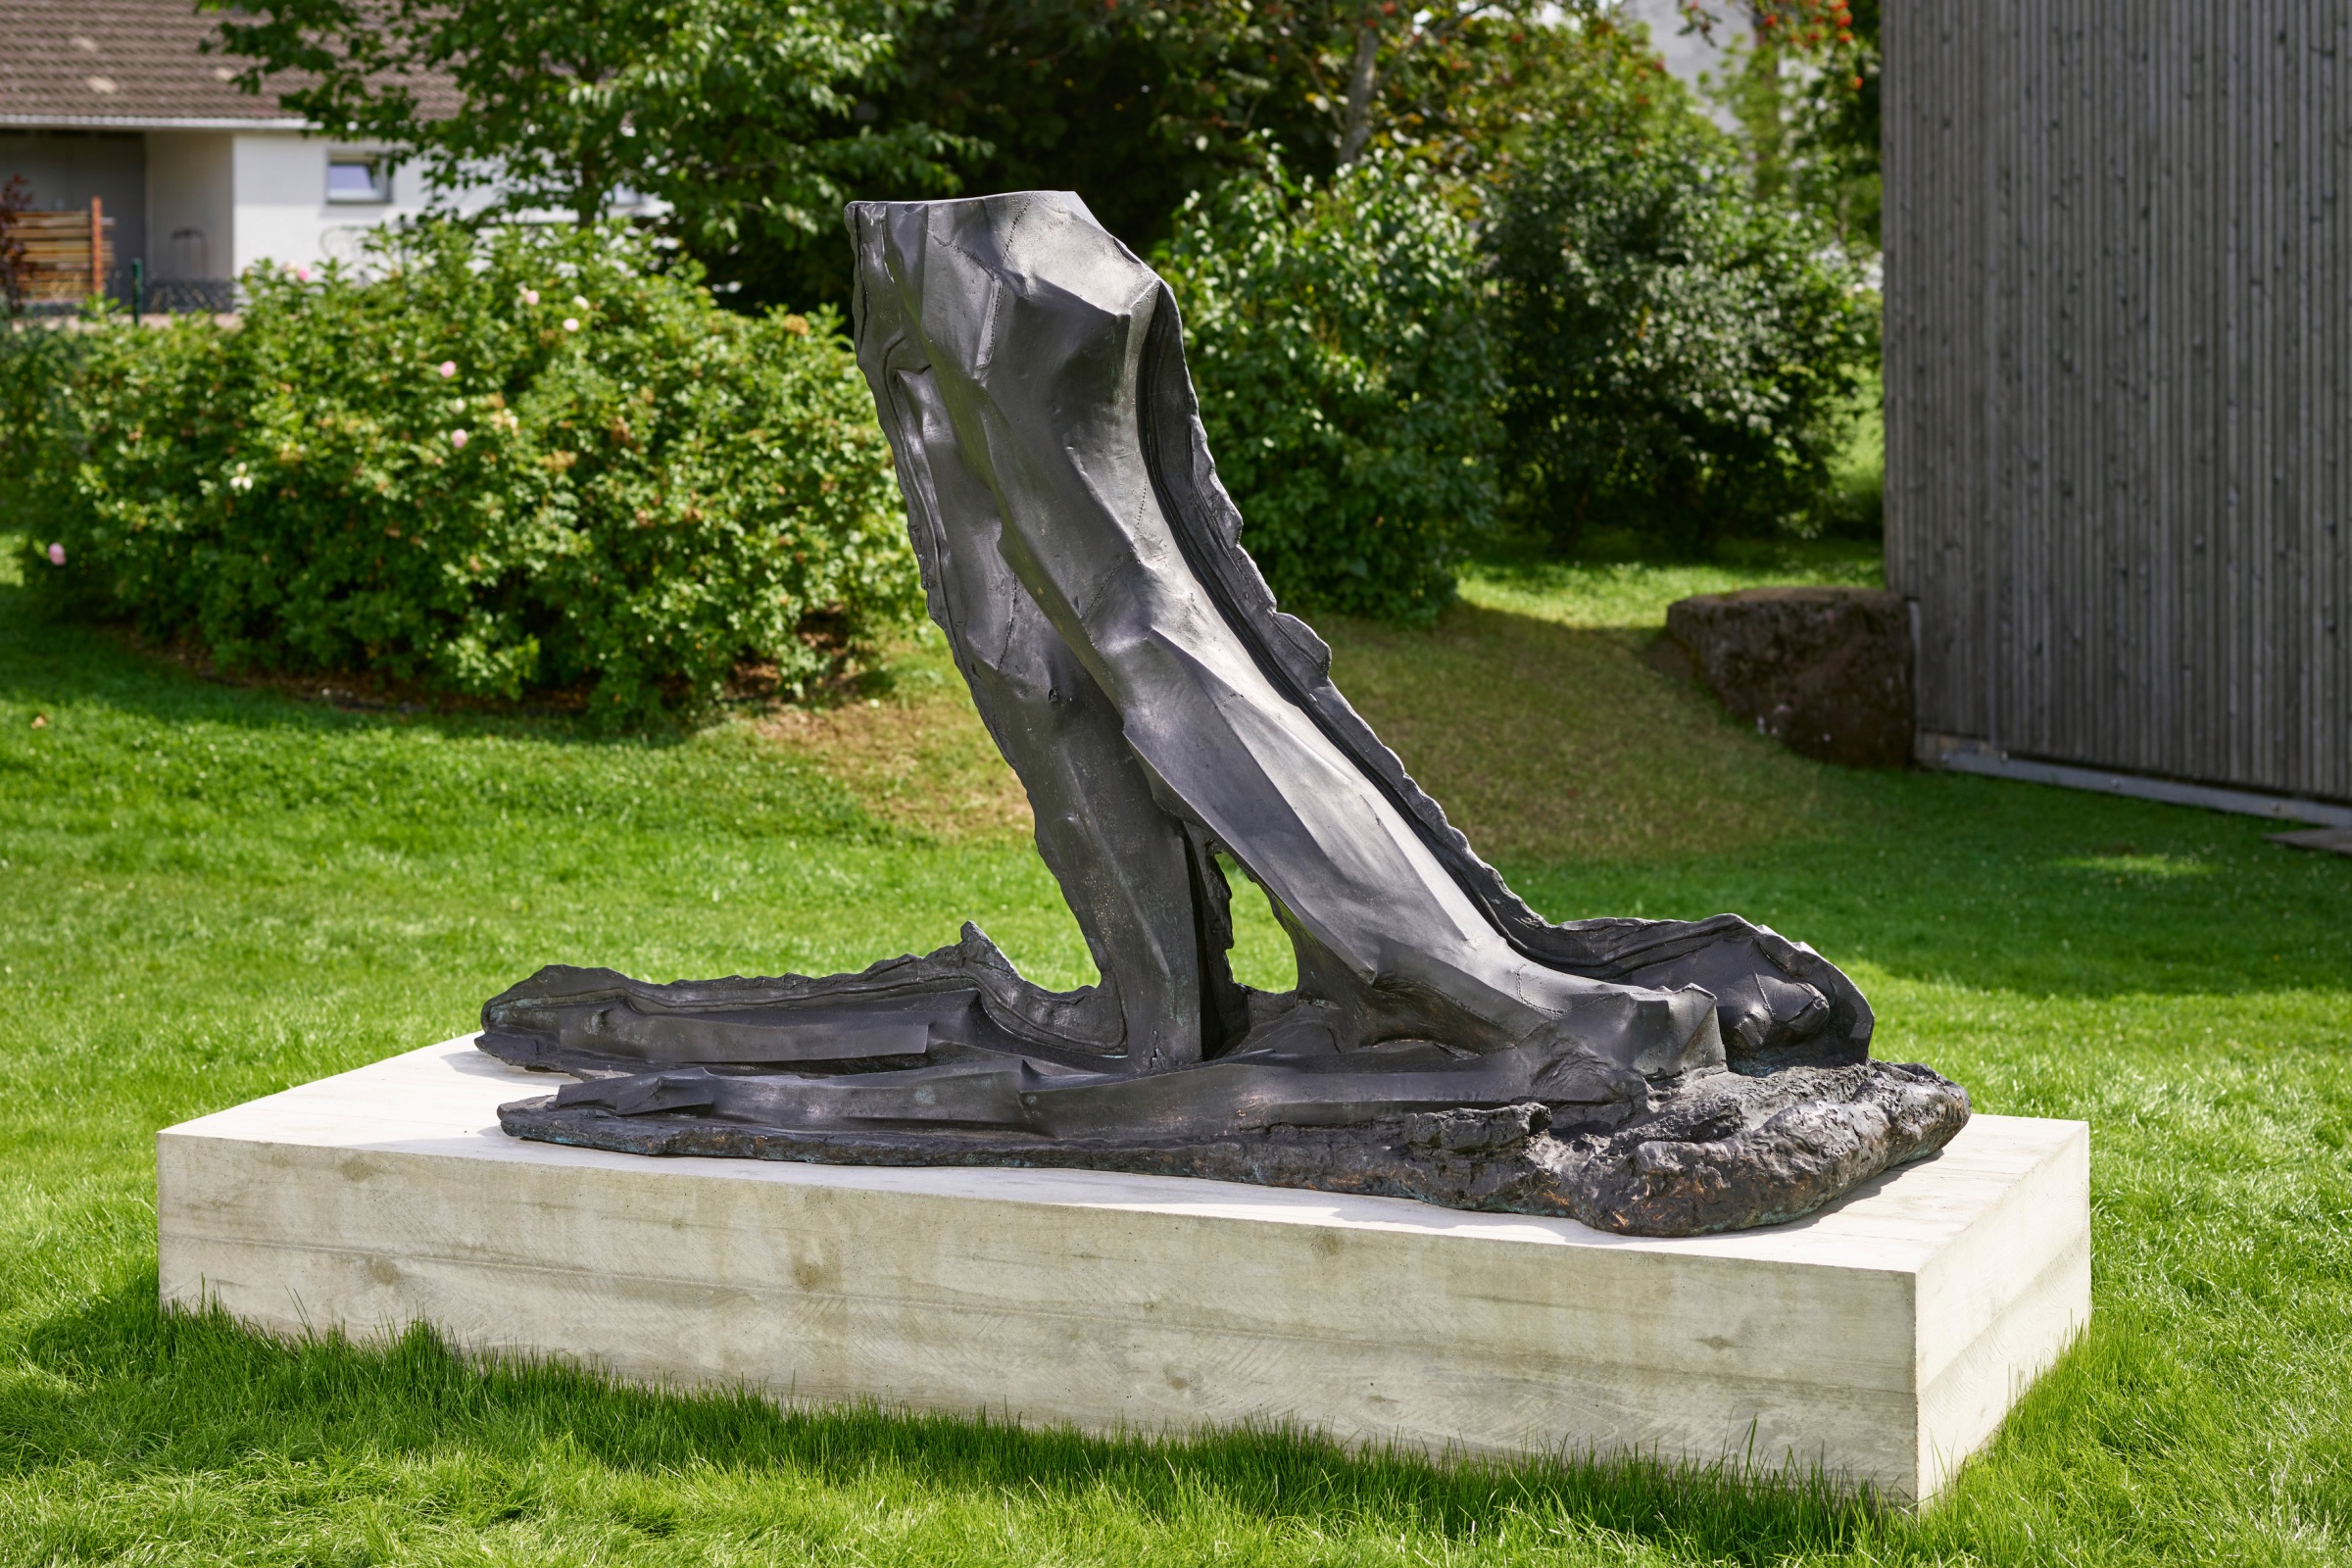 Georg Herold, Untitled, 2015, cast bronze, patinated, 140 x 257 x 95 cm.; 55 1/8 x 101 1/8 x 37 3/8 in.